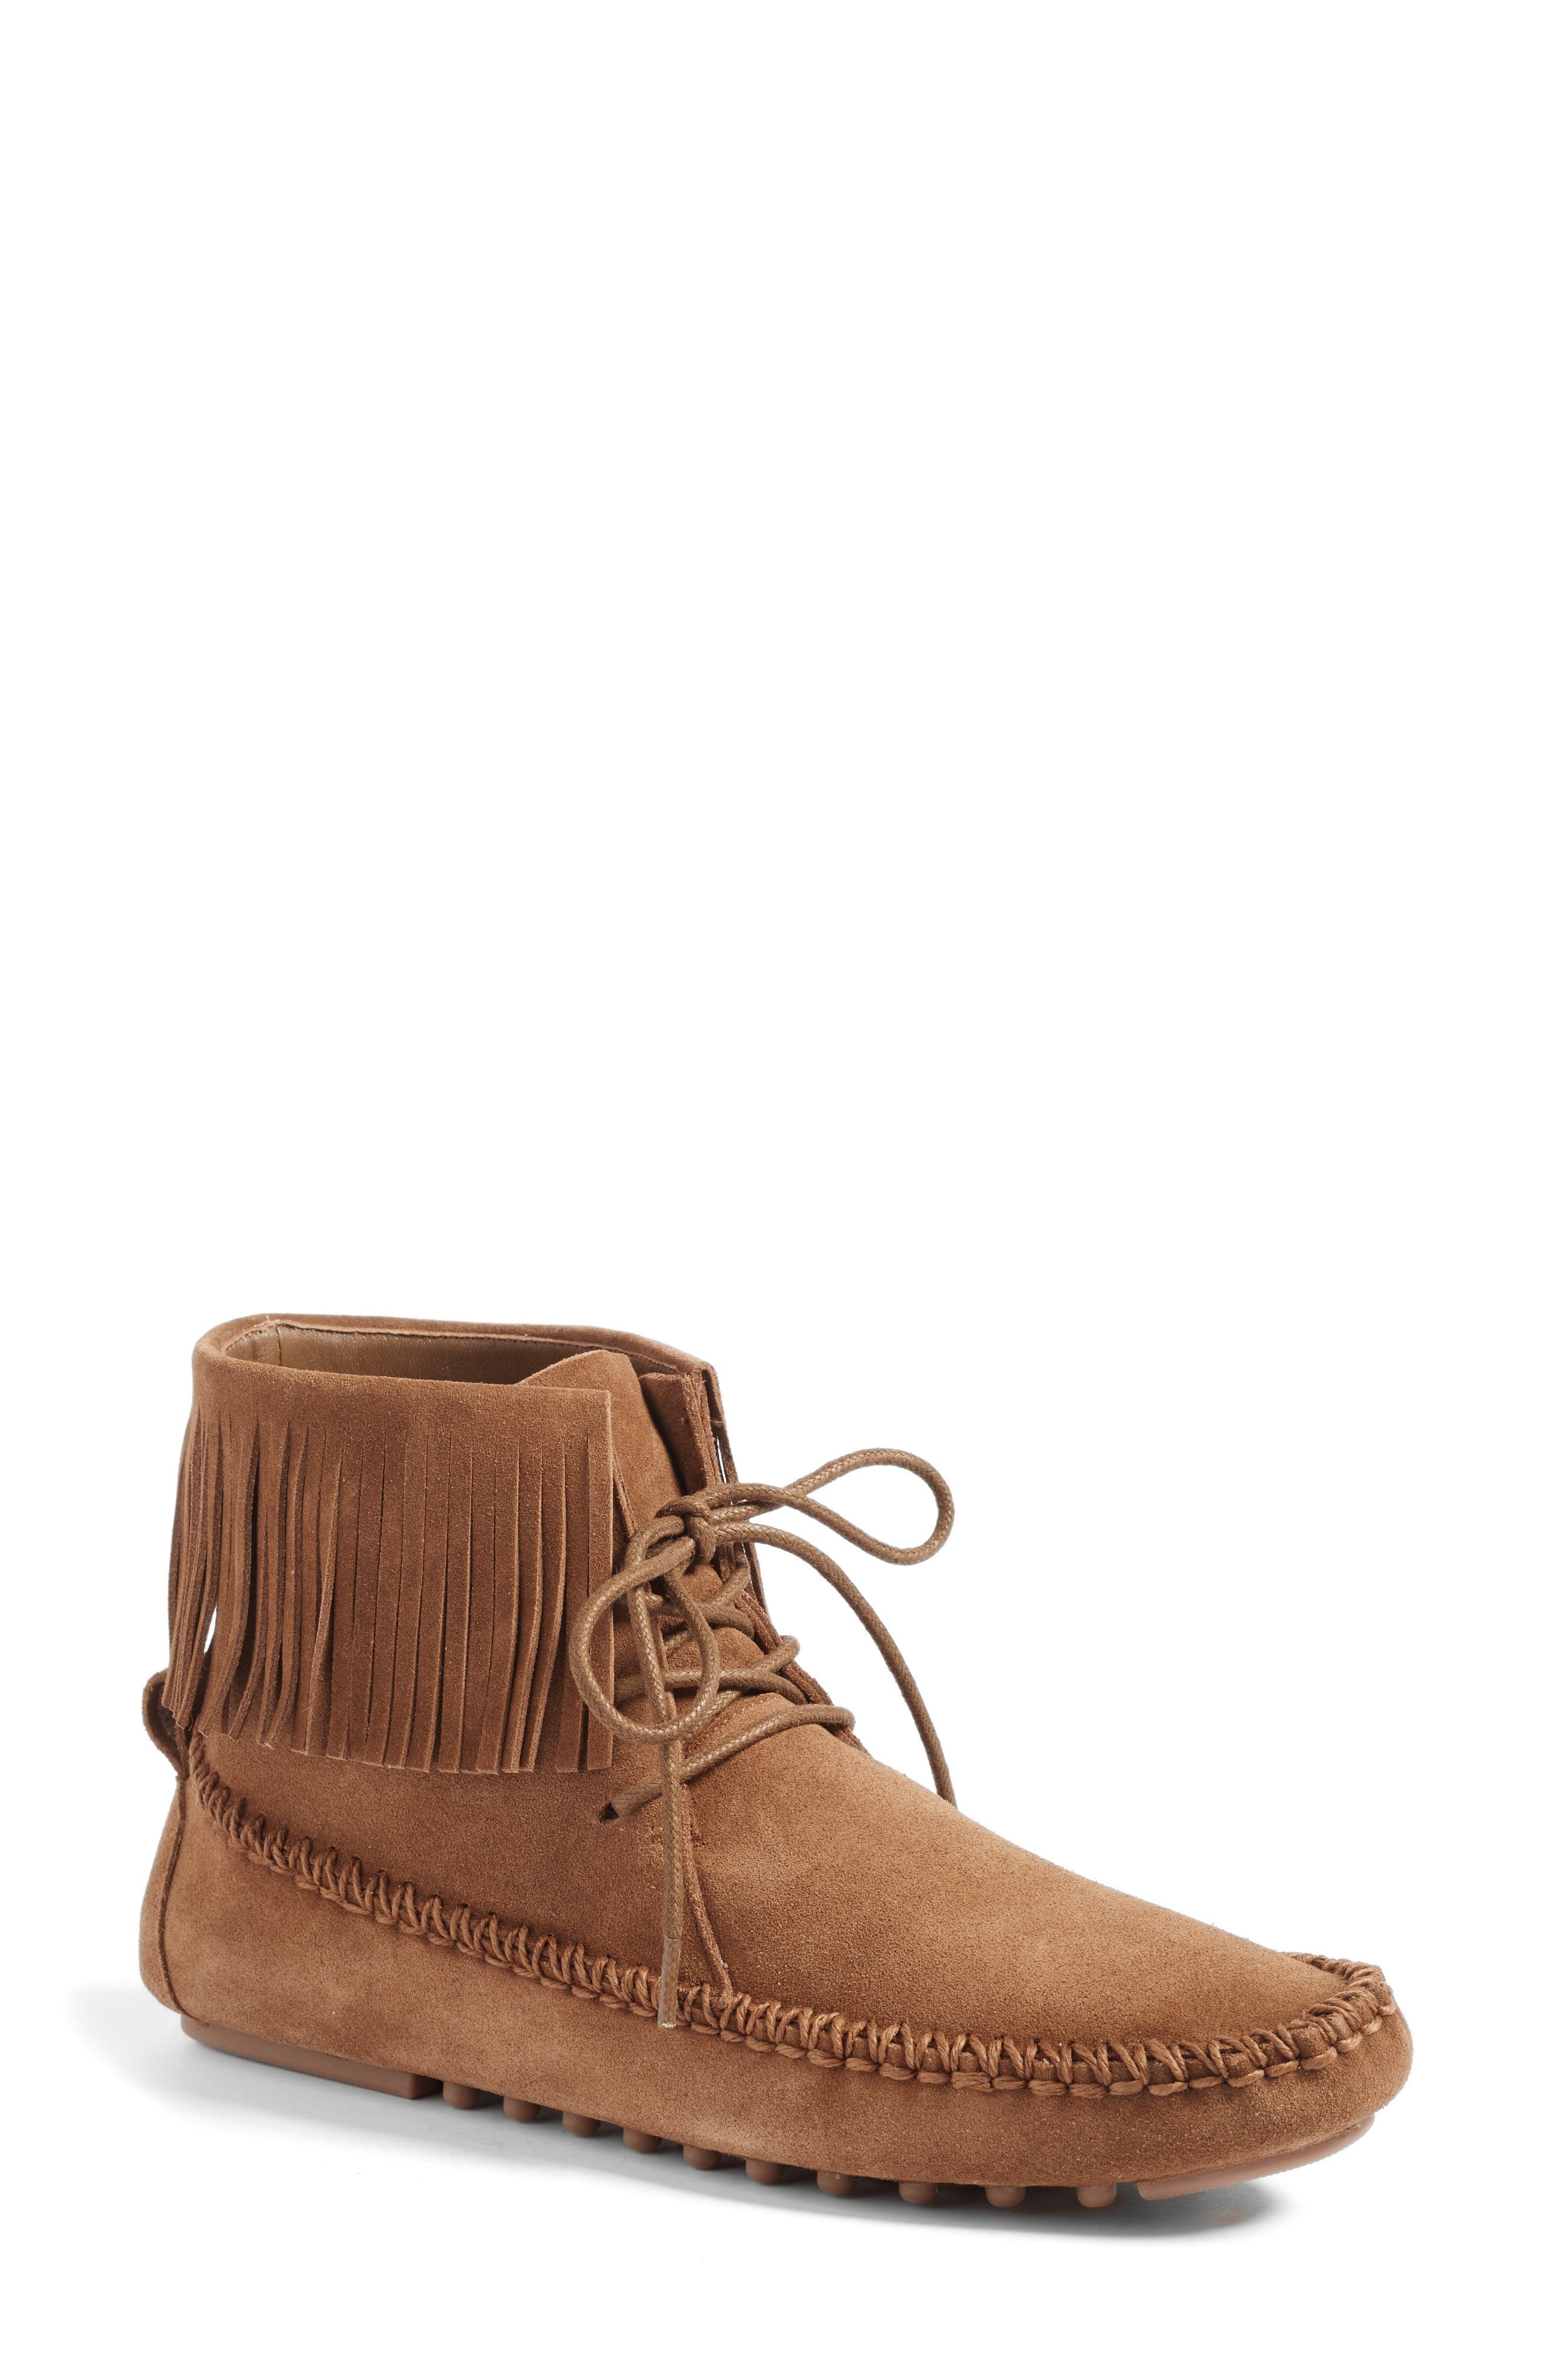 tory burch moccasin boots